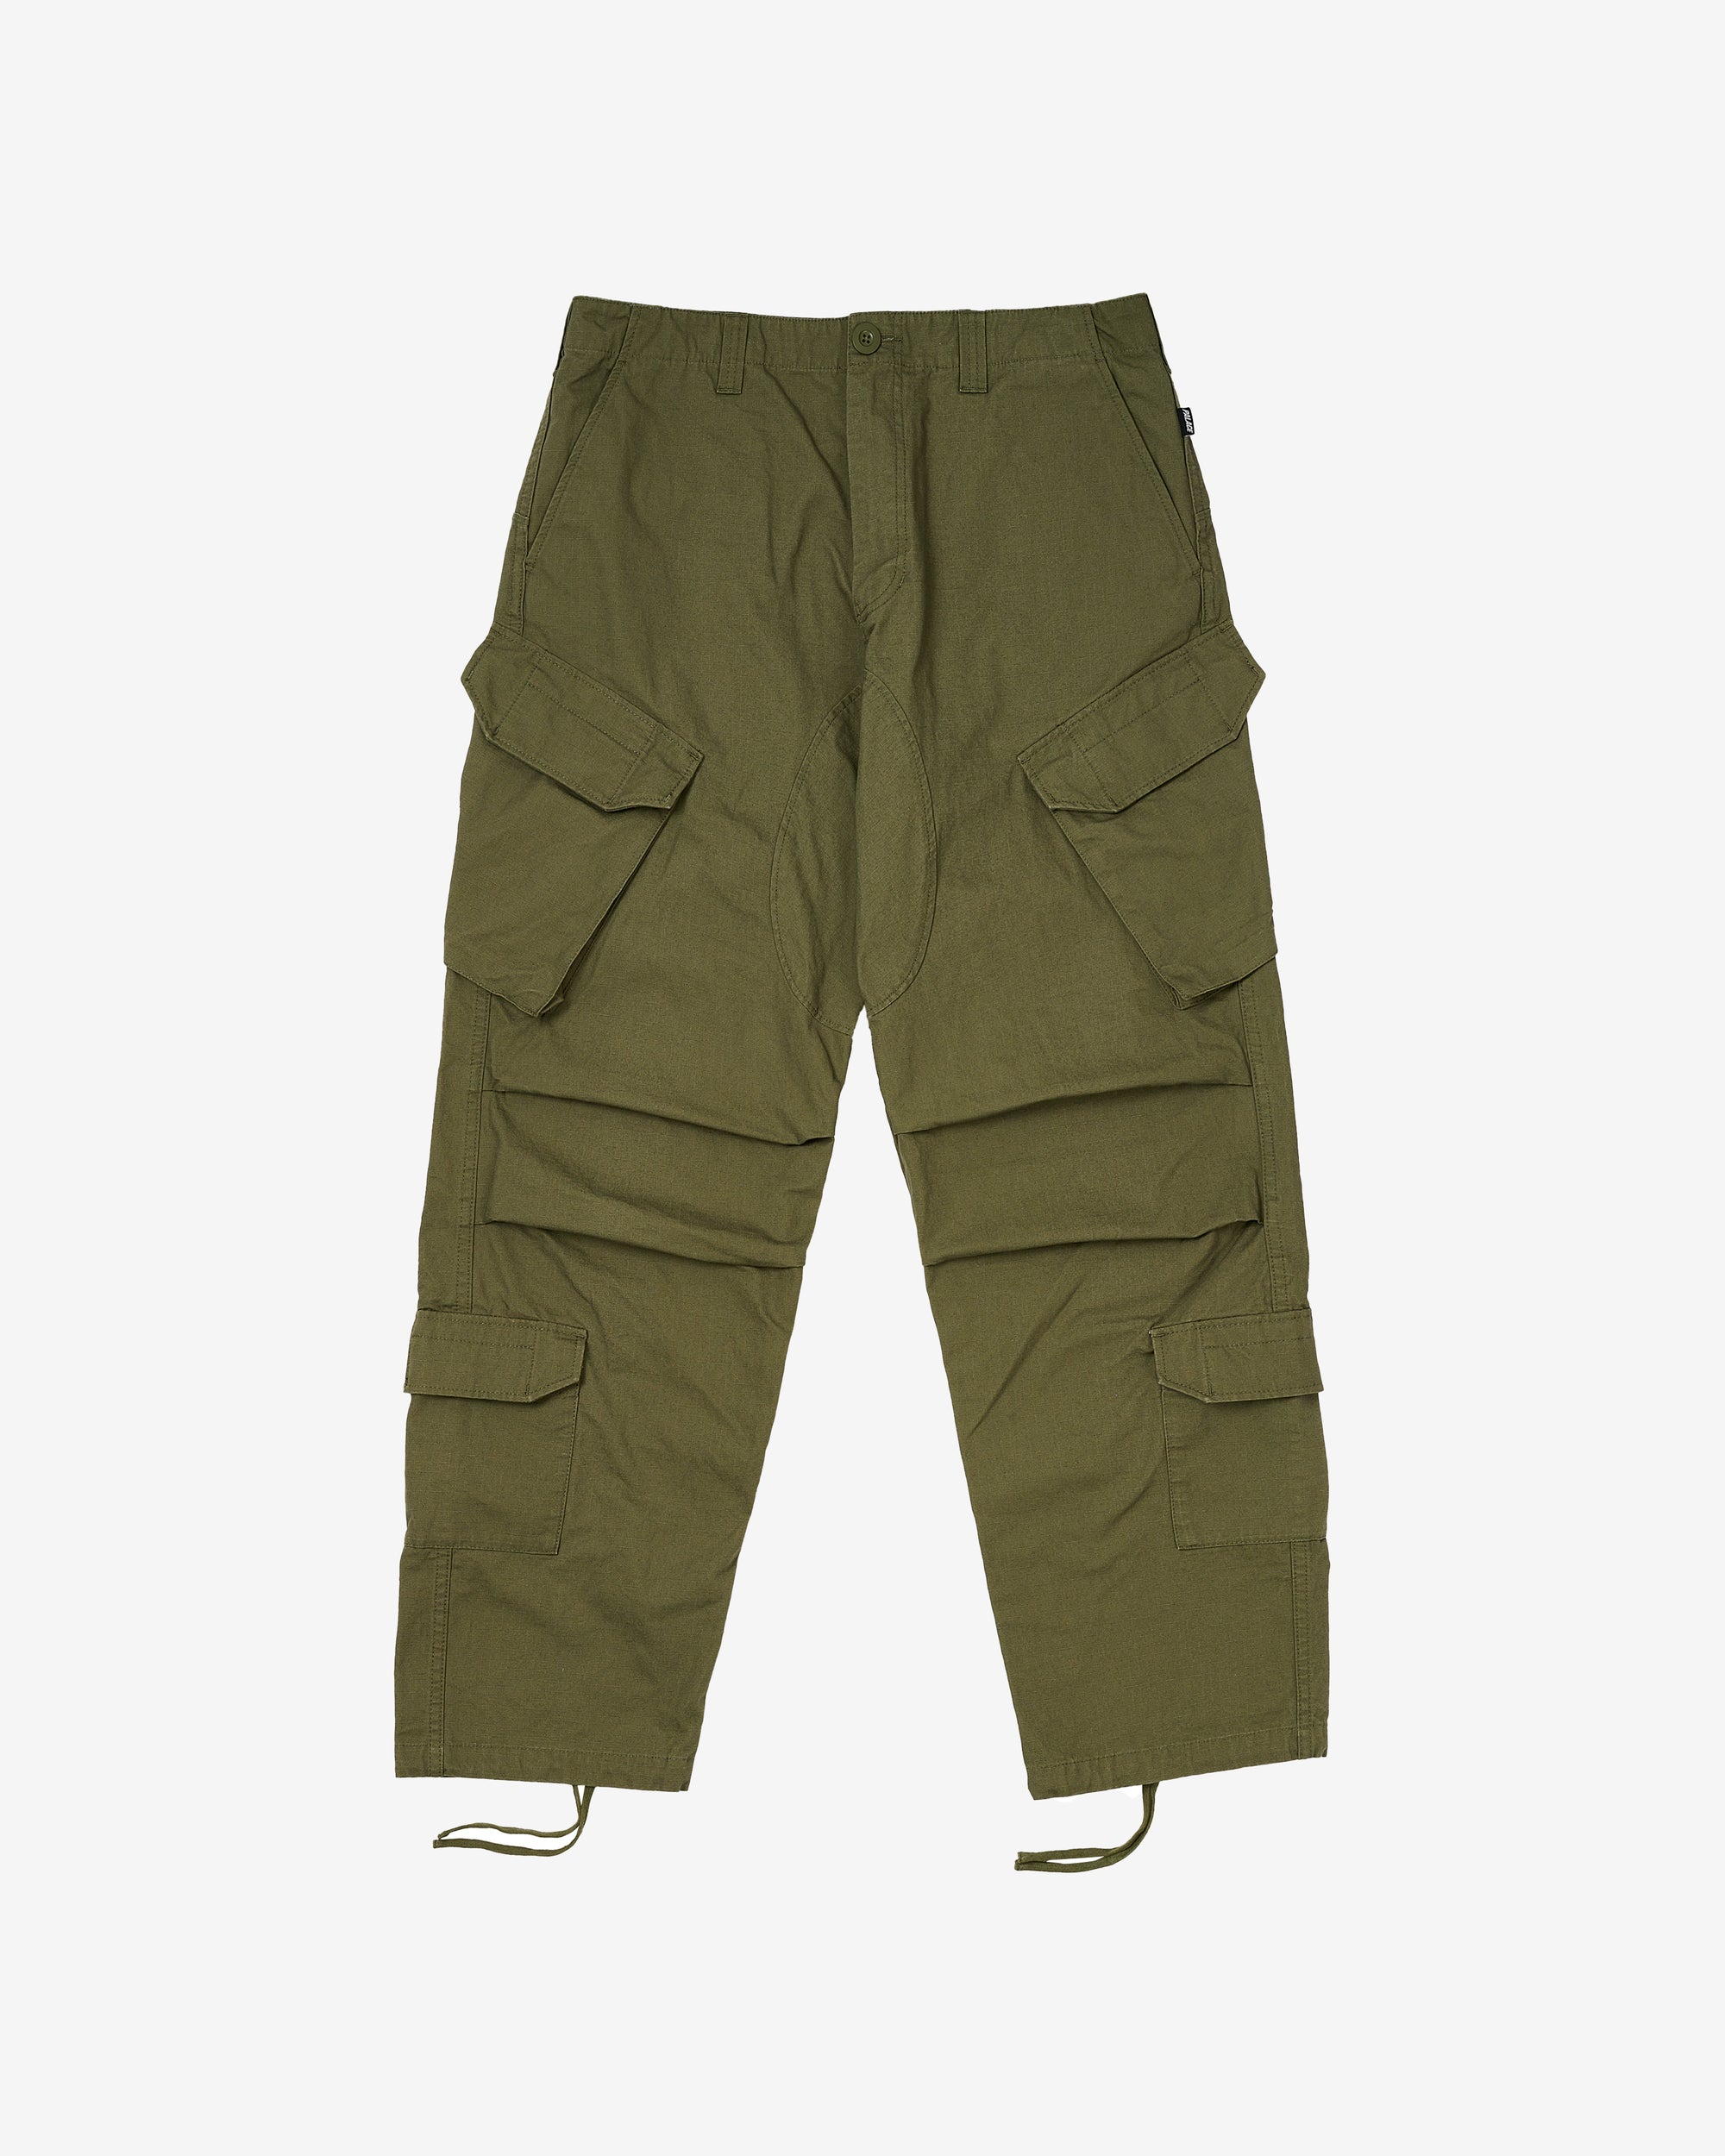 Palace - Men's Rn Cargo Trouser - (Olive) view 1